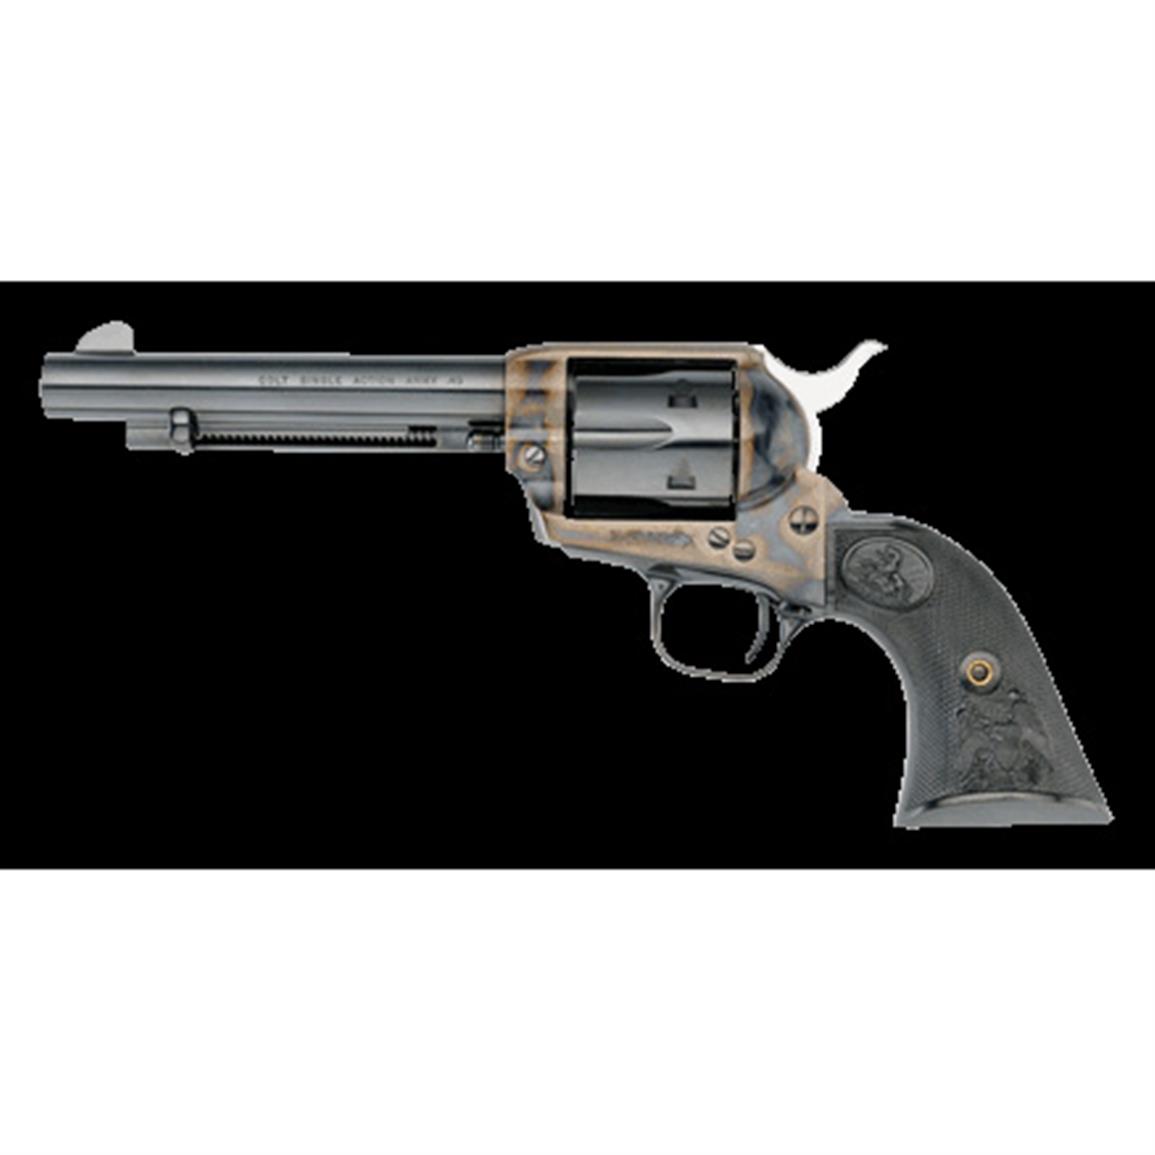 Colt Single Action Army Peacemaker, Revolver, .357 Magnum, P1640, 98289004525, 4.75" Barrel, 6-round